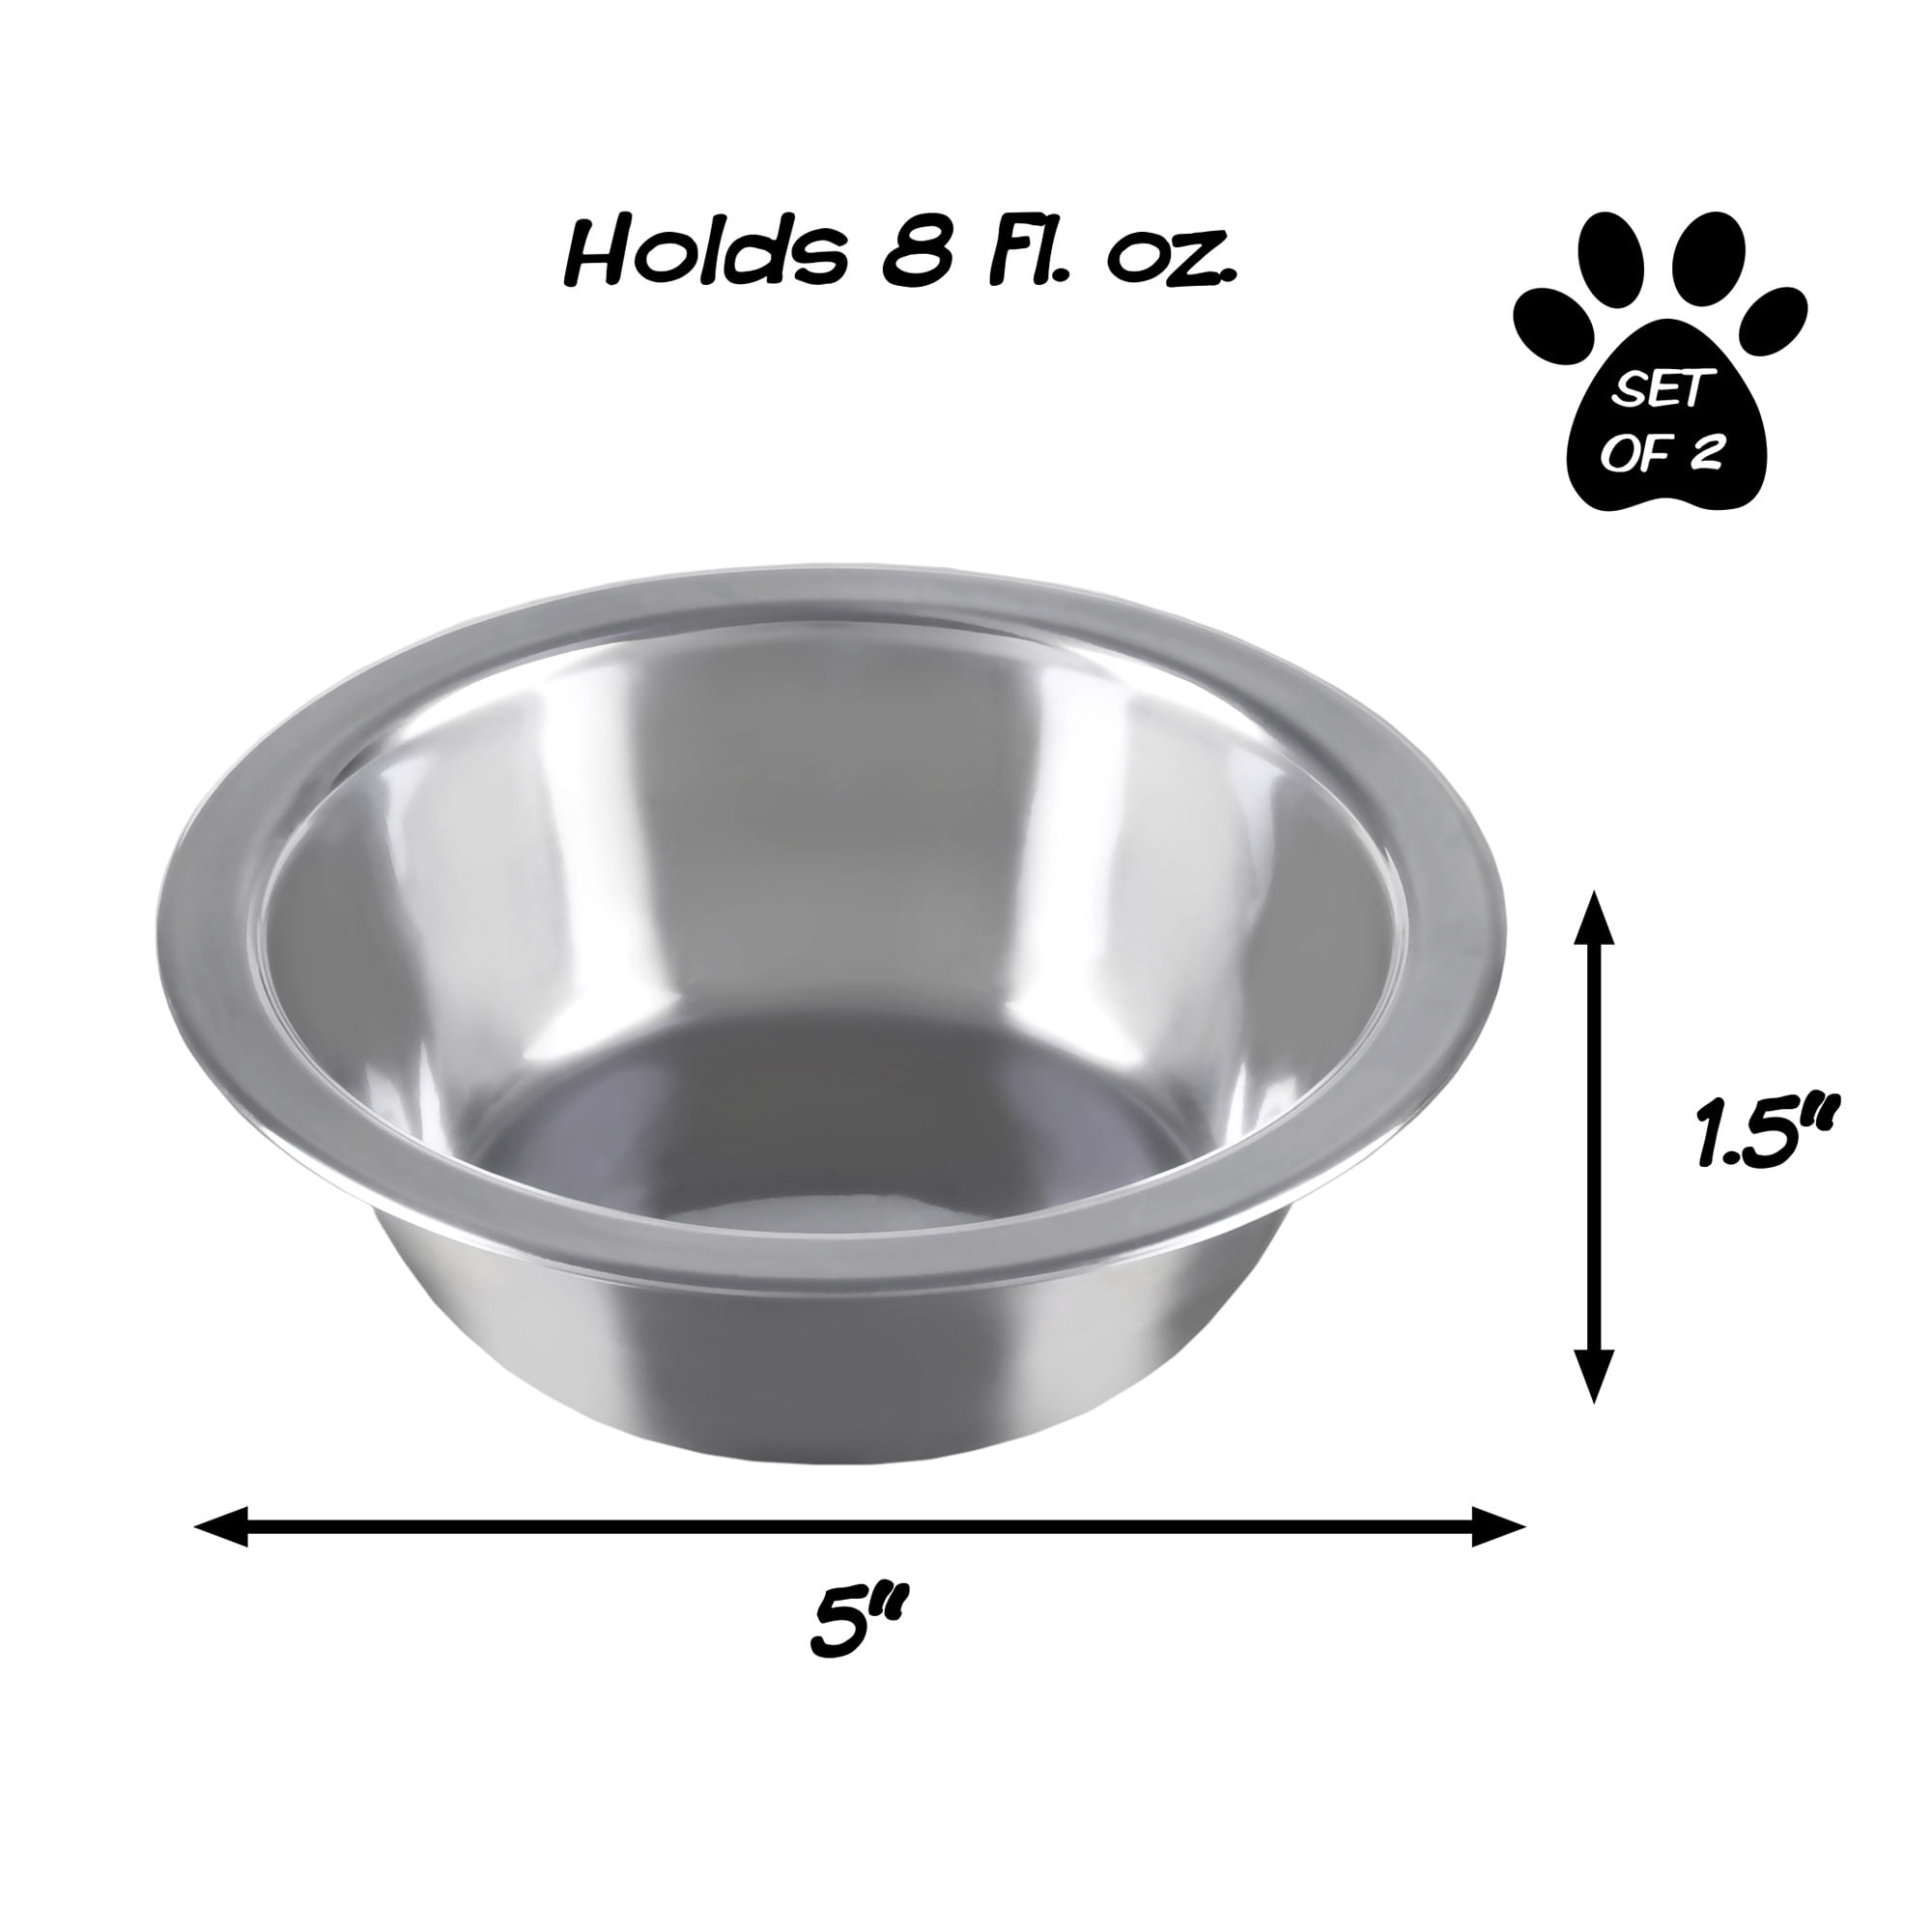 Juqiboom Dog Bowls 2 Stainless Steel Bowl for Pet Water and Food